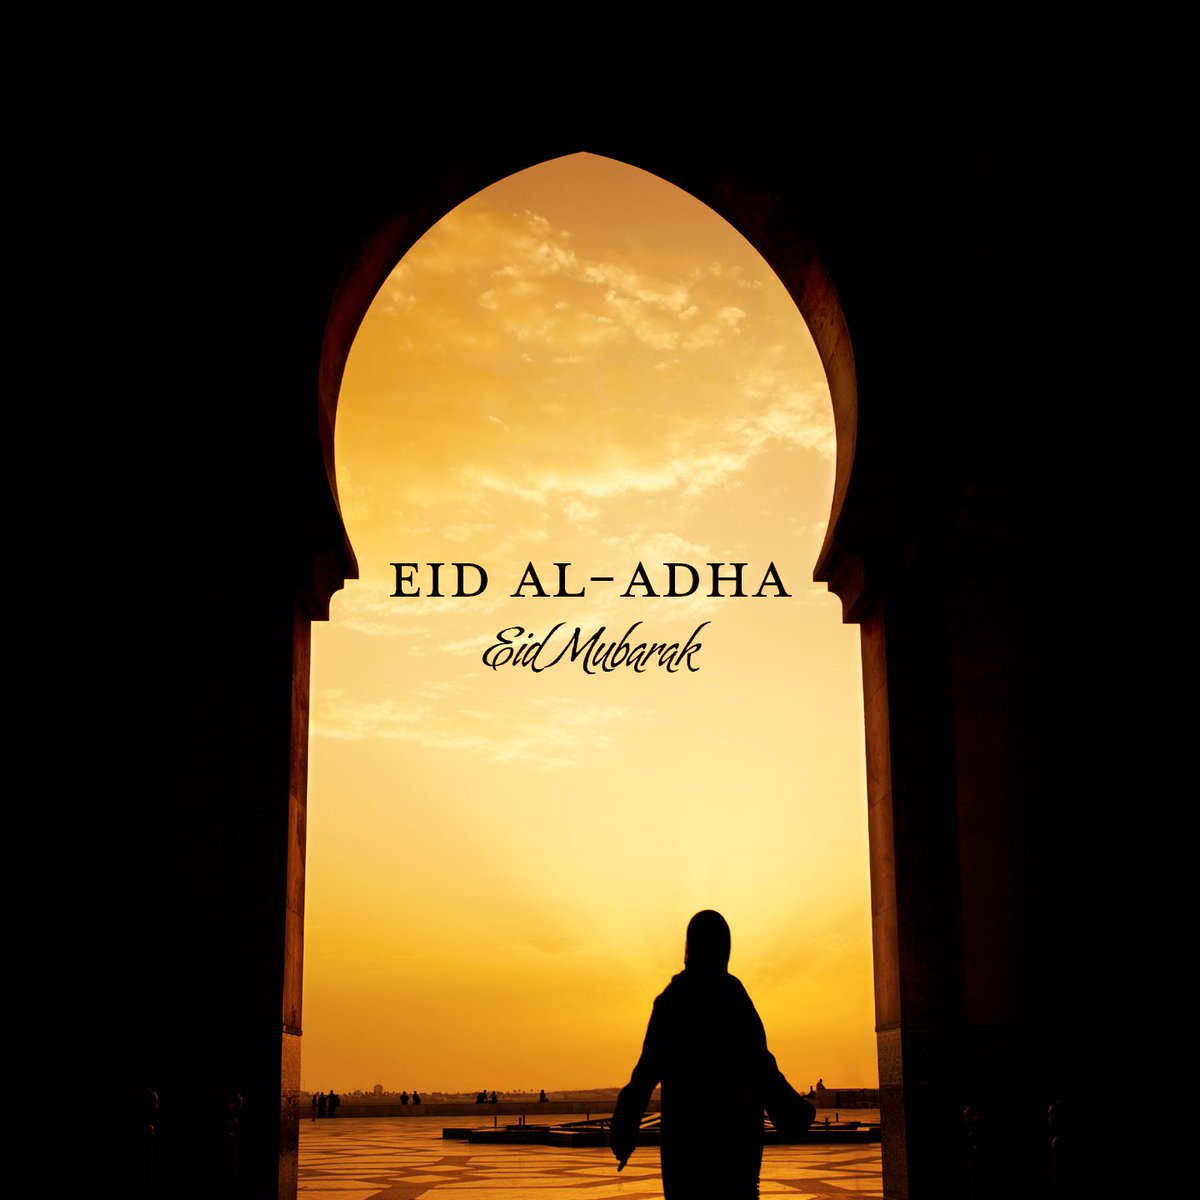 Eid Mubarak. May this Eid Al Adha bring you peace, happiness and may it foster goodwill and brotherhood. Eid celebrations demonstrate the spirit of neighbourliness, compassion and generosity. Common values we all share. #EidMubarak #EidAlAdha